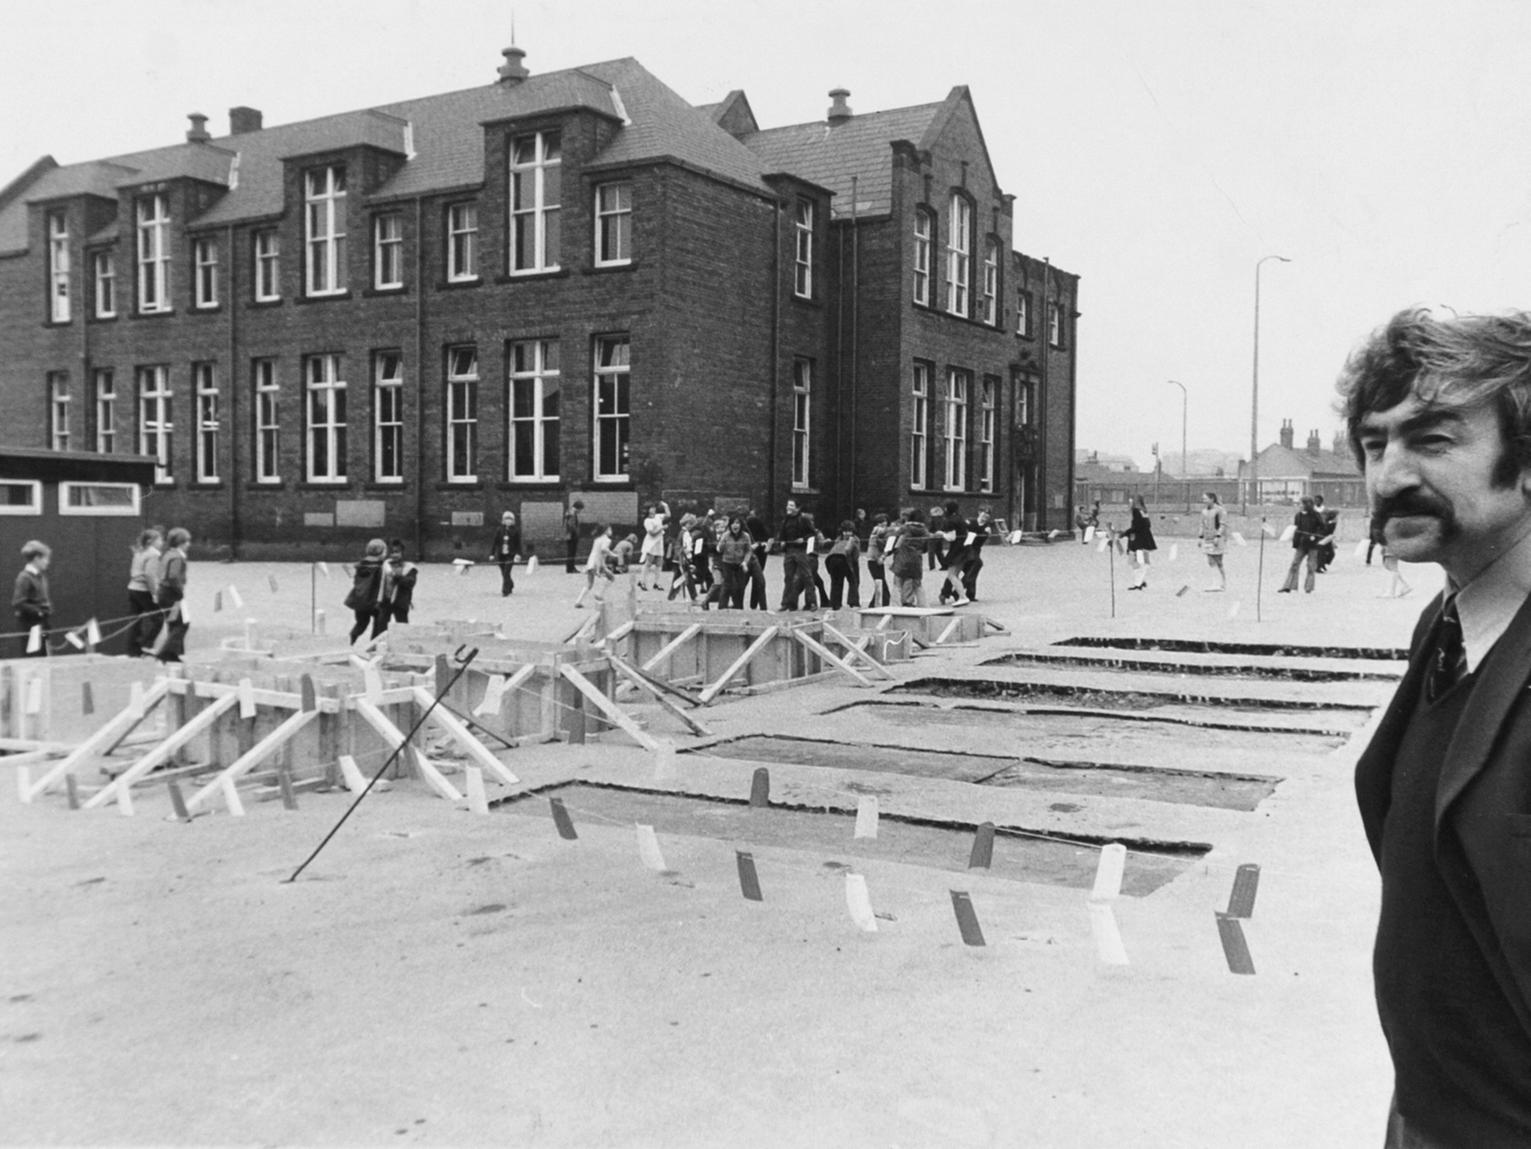 Victoria Middle School on York Road. Clive Lockwood looks out into the playground which was gradually being reduced.